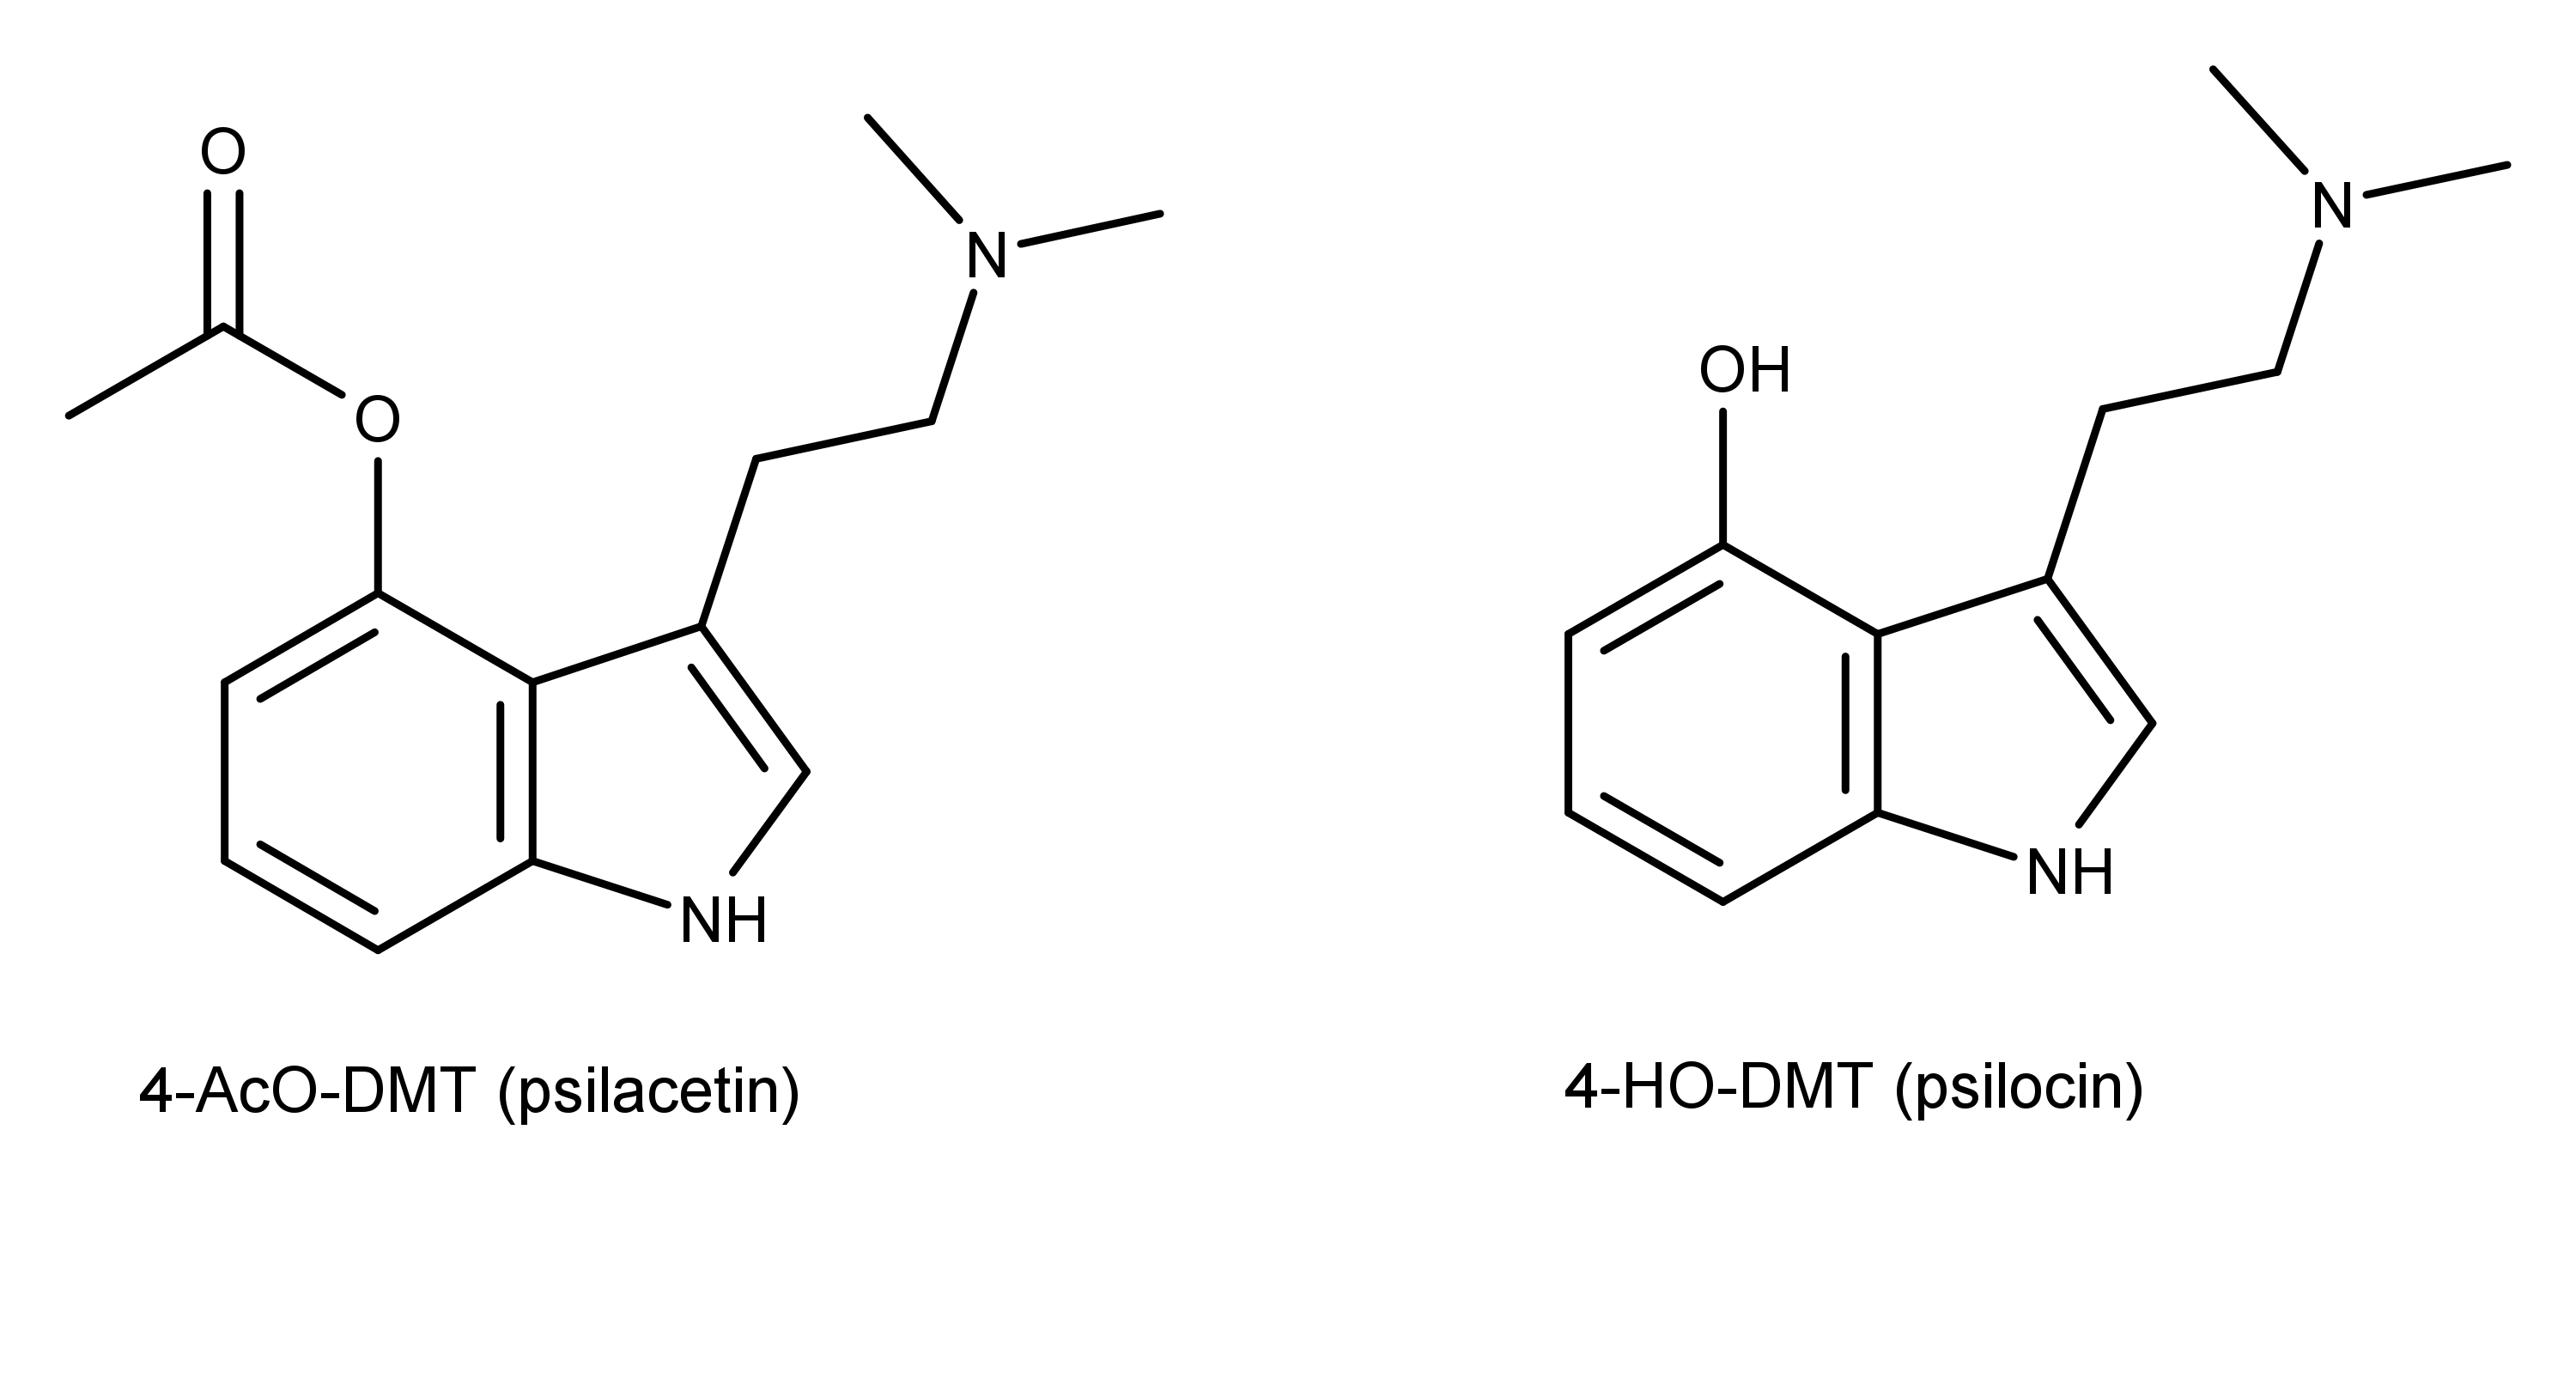 Chemical structures of psilacetin and psilocin.